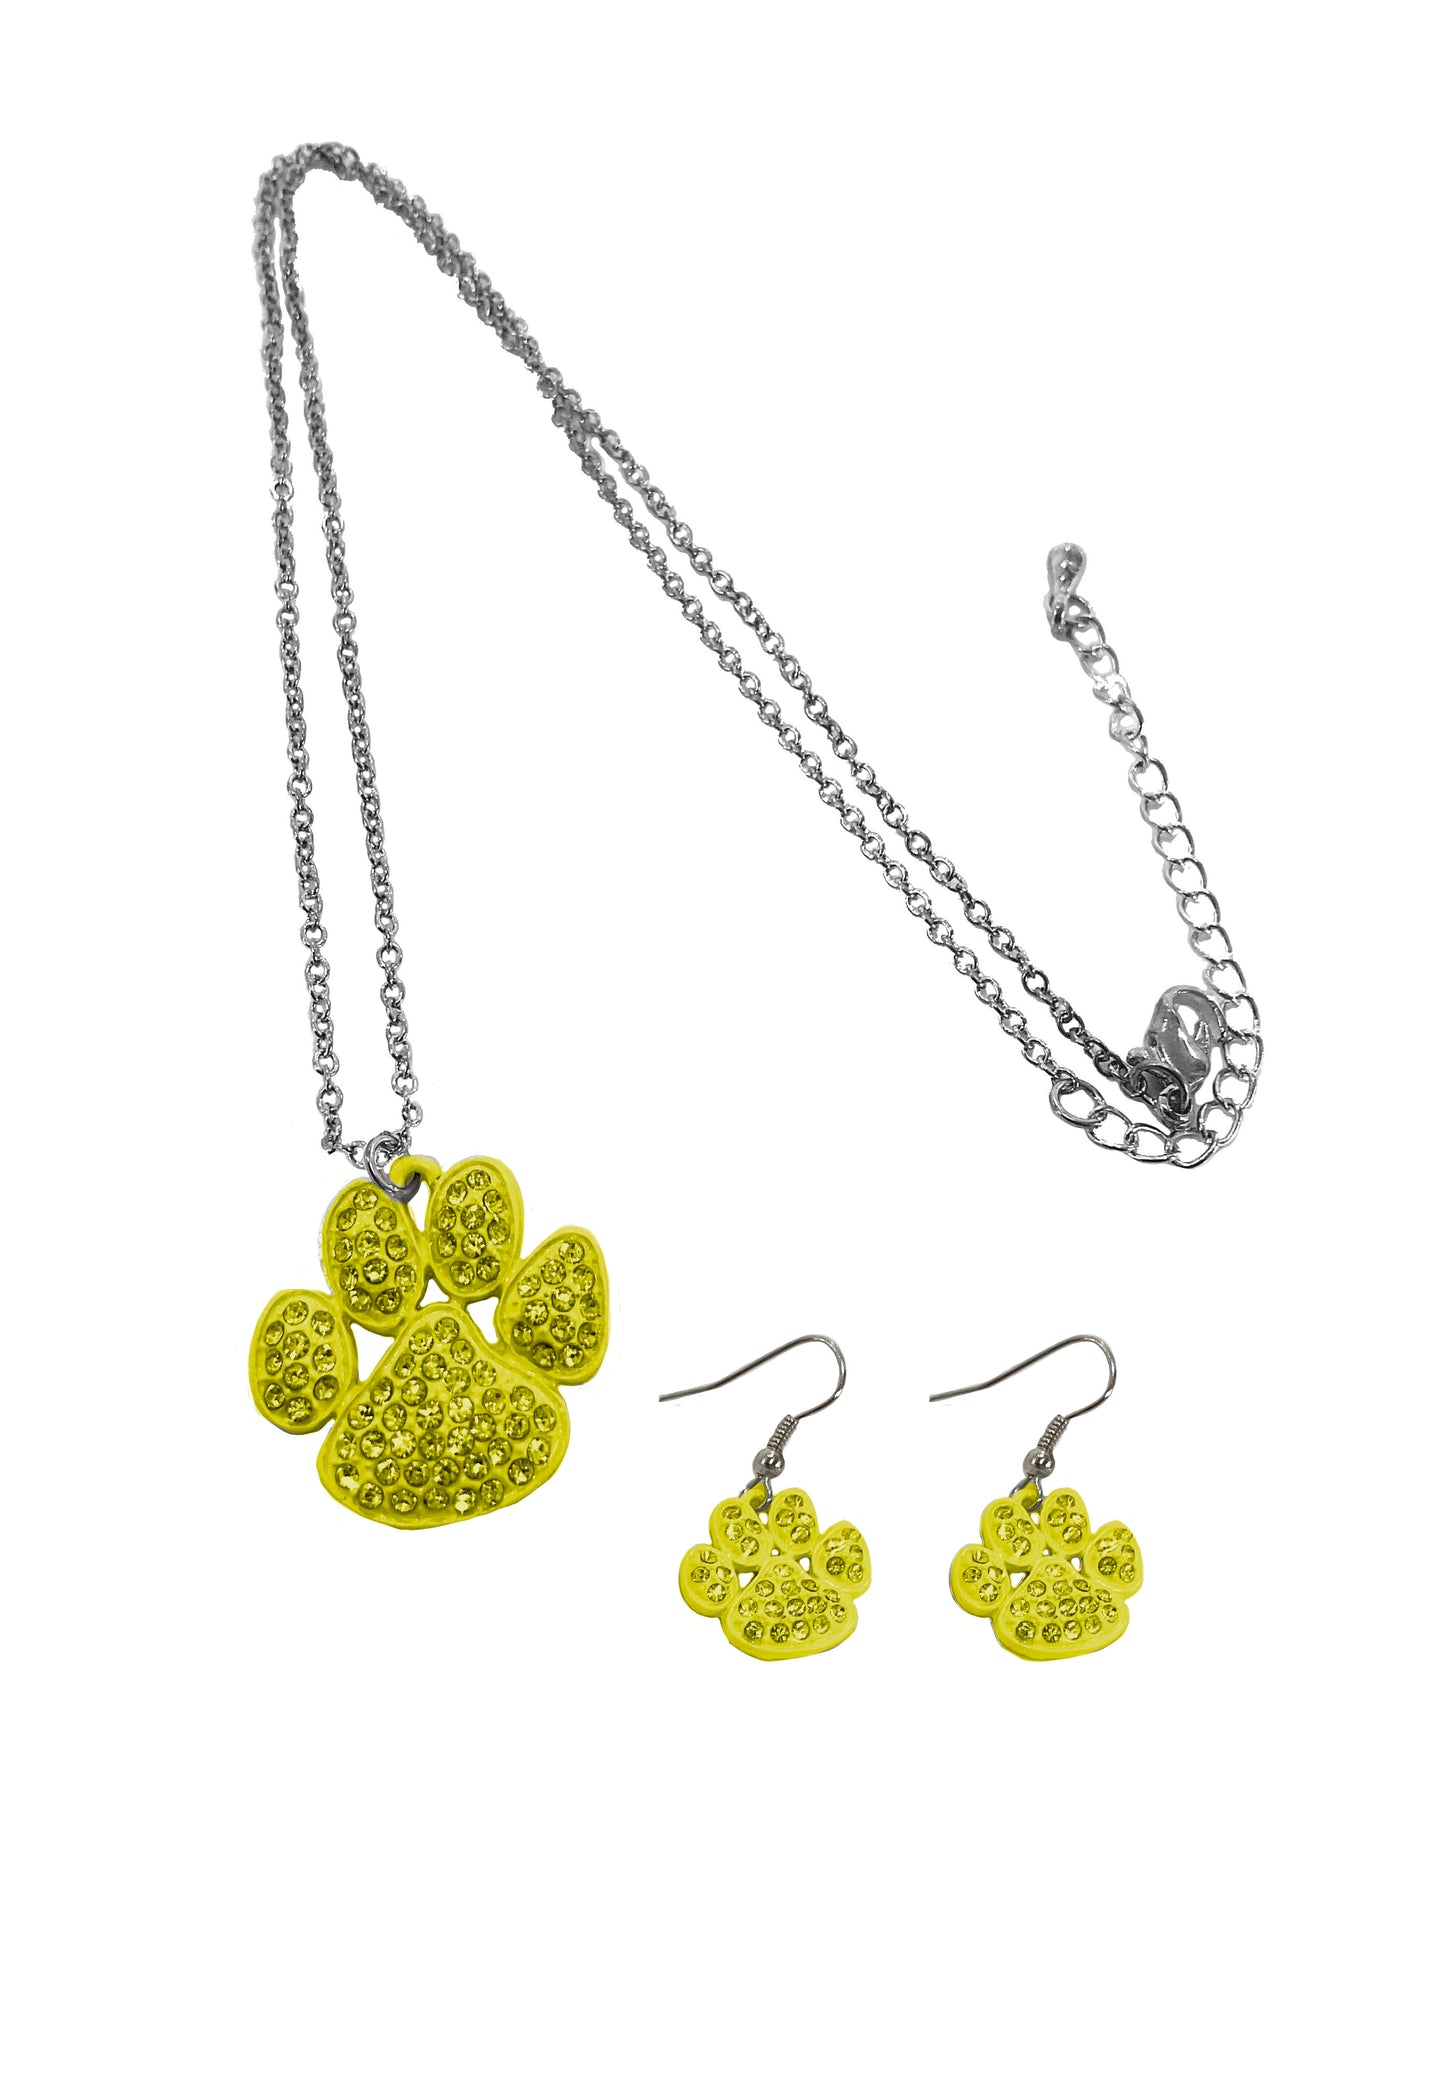 Paw Necklace Earring Set #12-13472